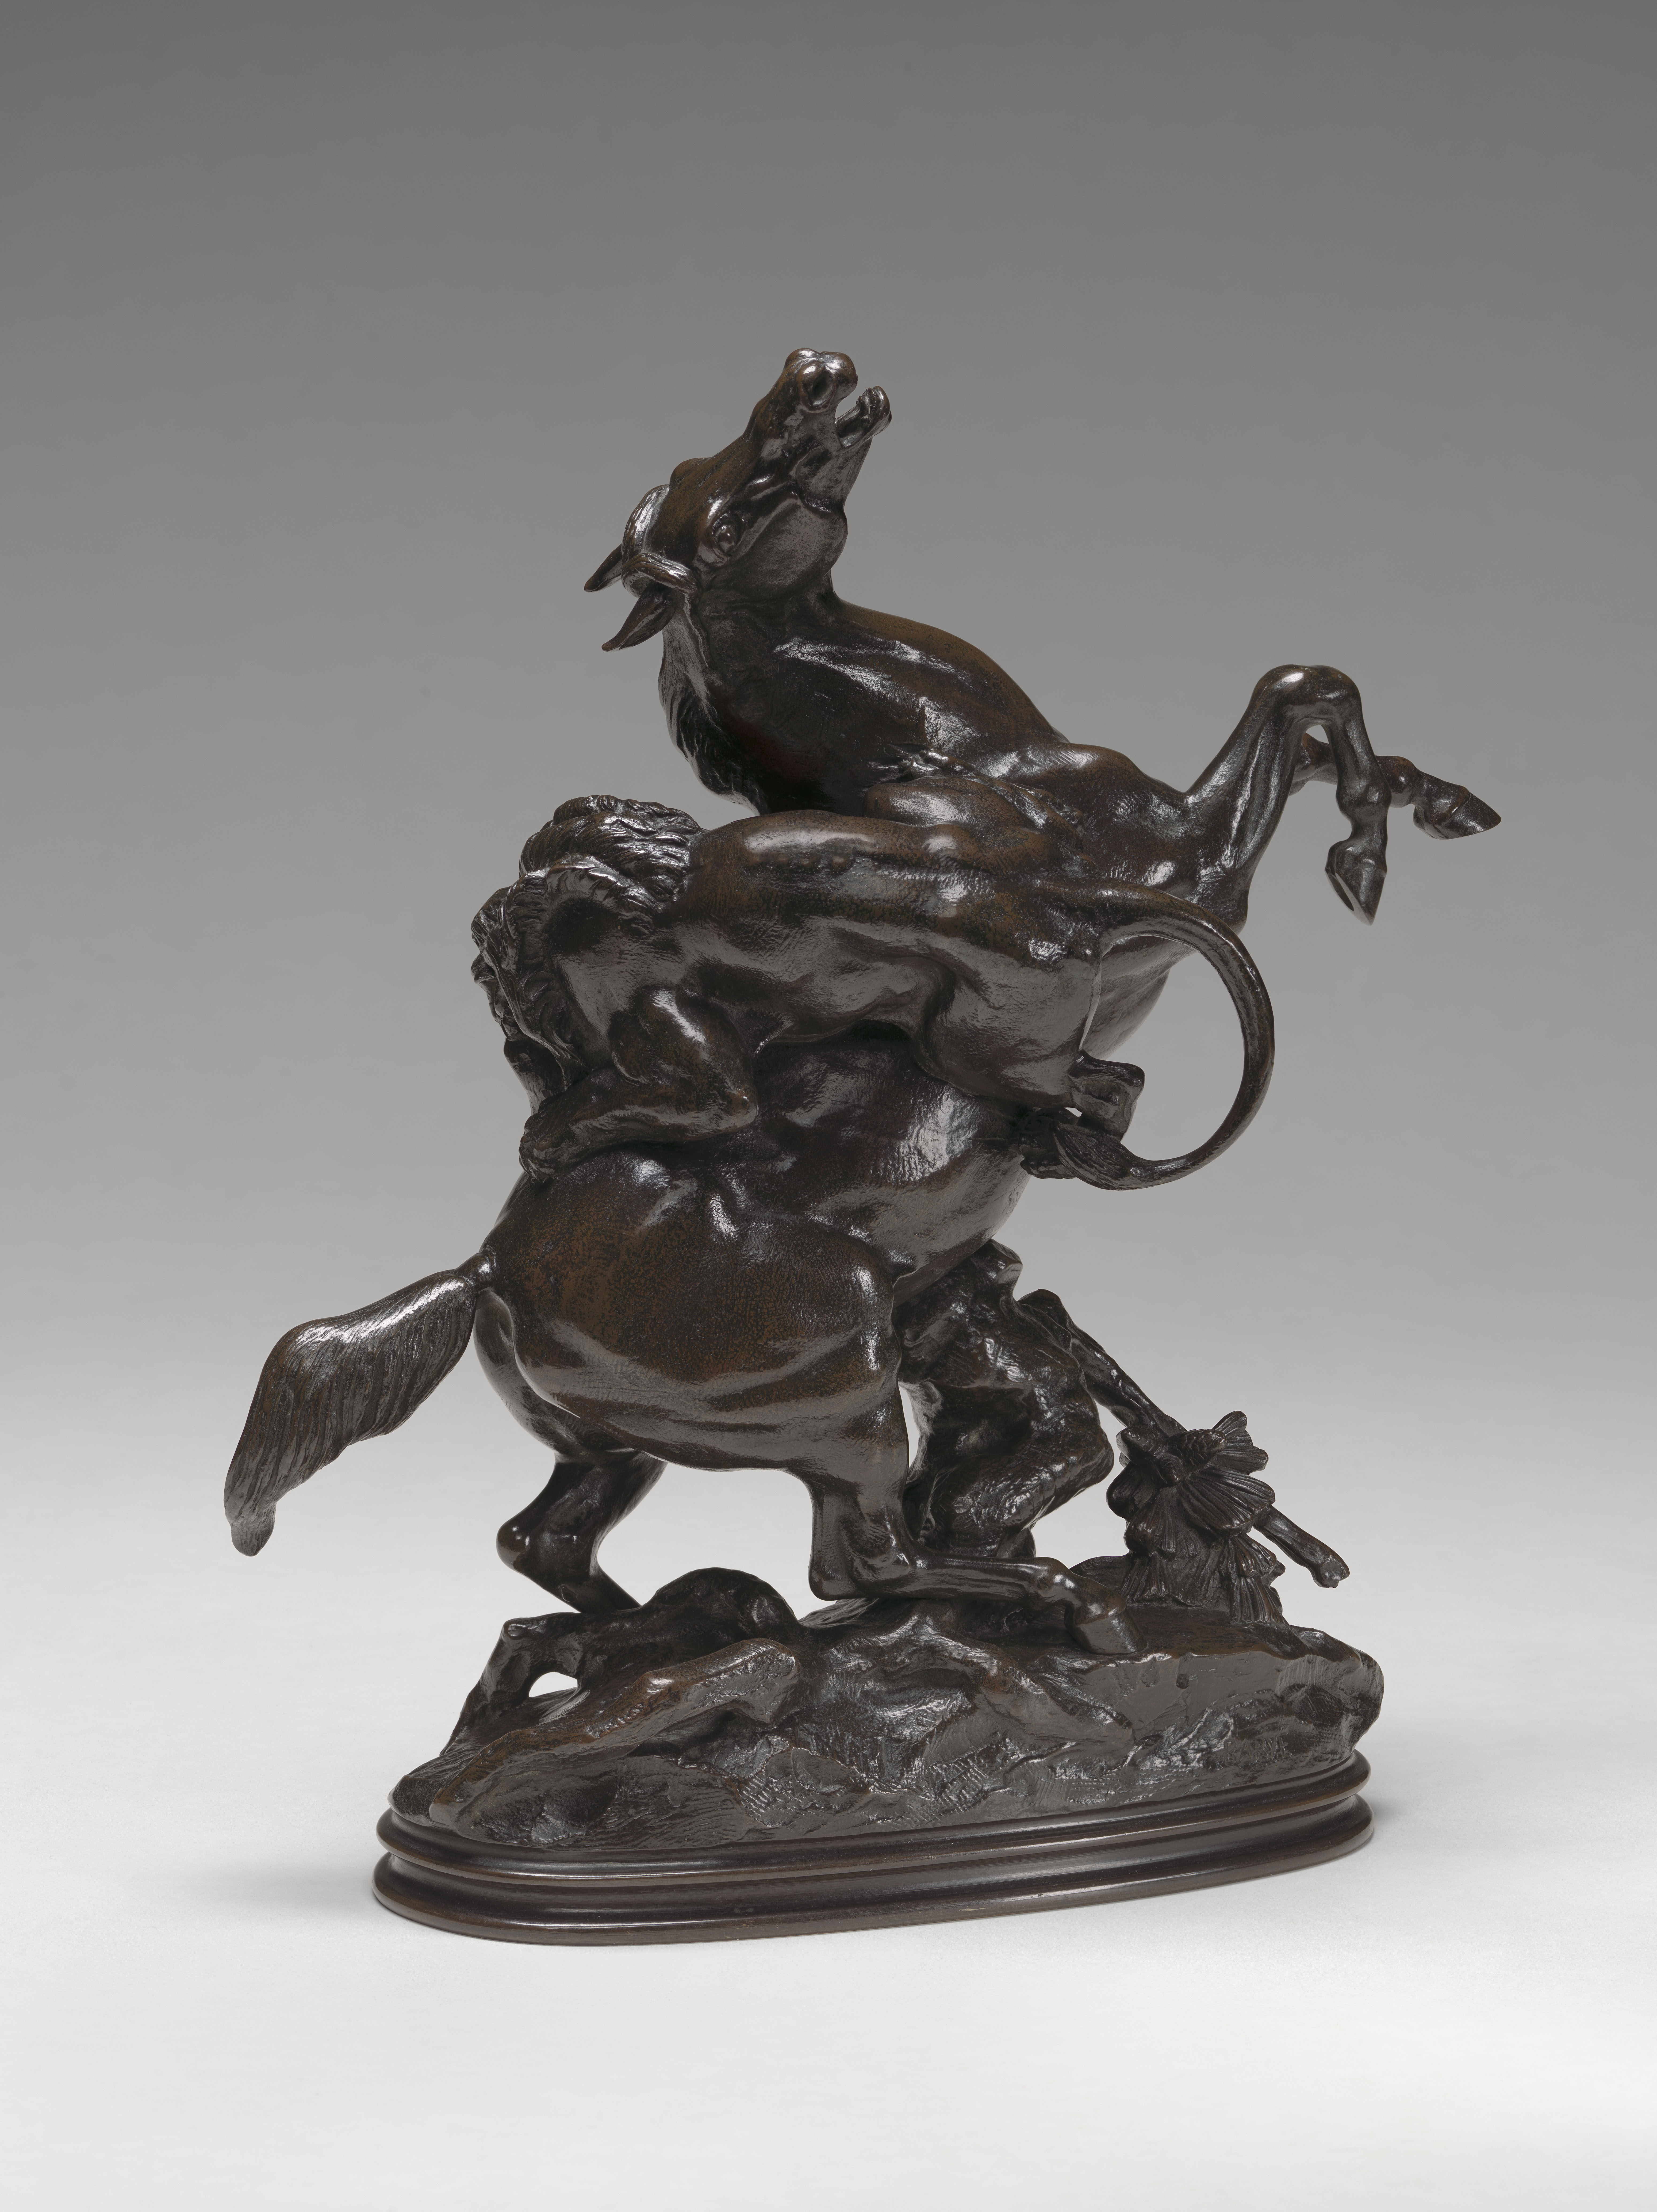 Horse Surprised by a Lion, 1850, Antoine-Louis Barye (French, 1796-1875), bronze. Virginia Museum of Fine Arts, Gift of Mrs. Nelson L. St. Clair Jr.